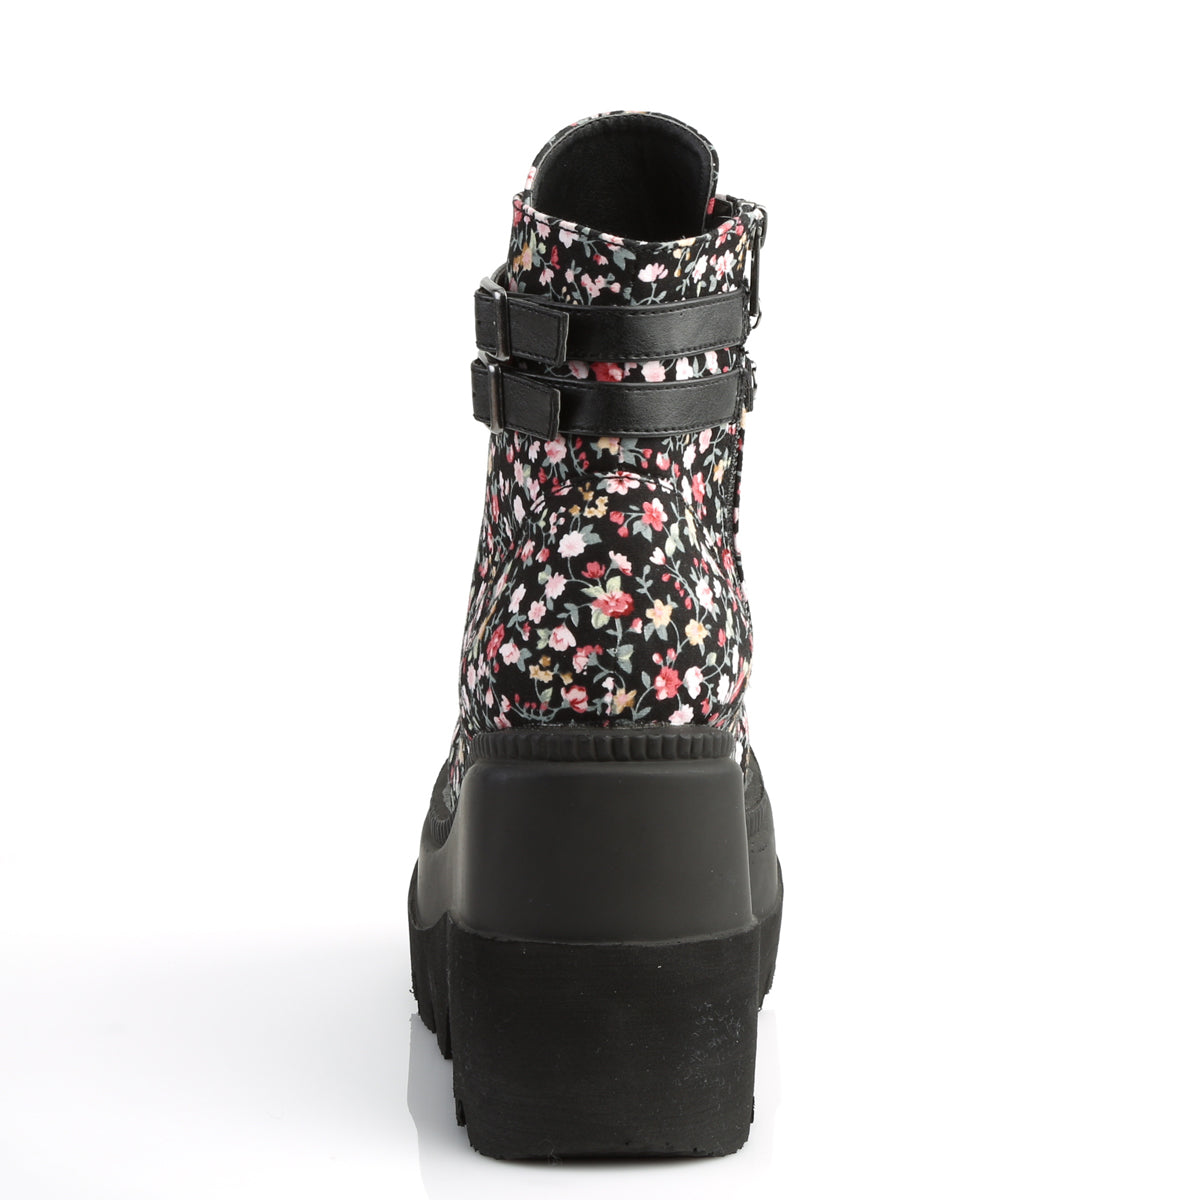 SHAKER-52ST Floral Fabric Ankle Boot Demonia